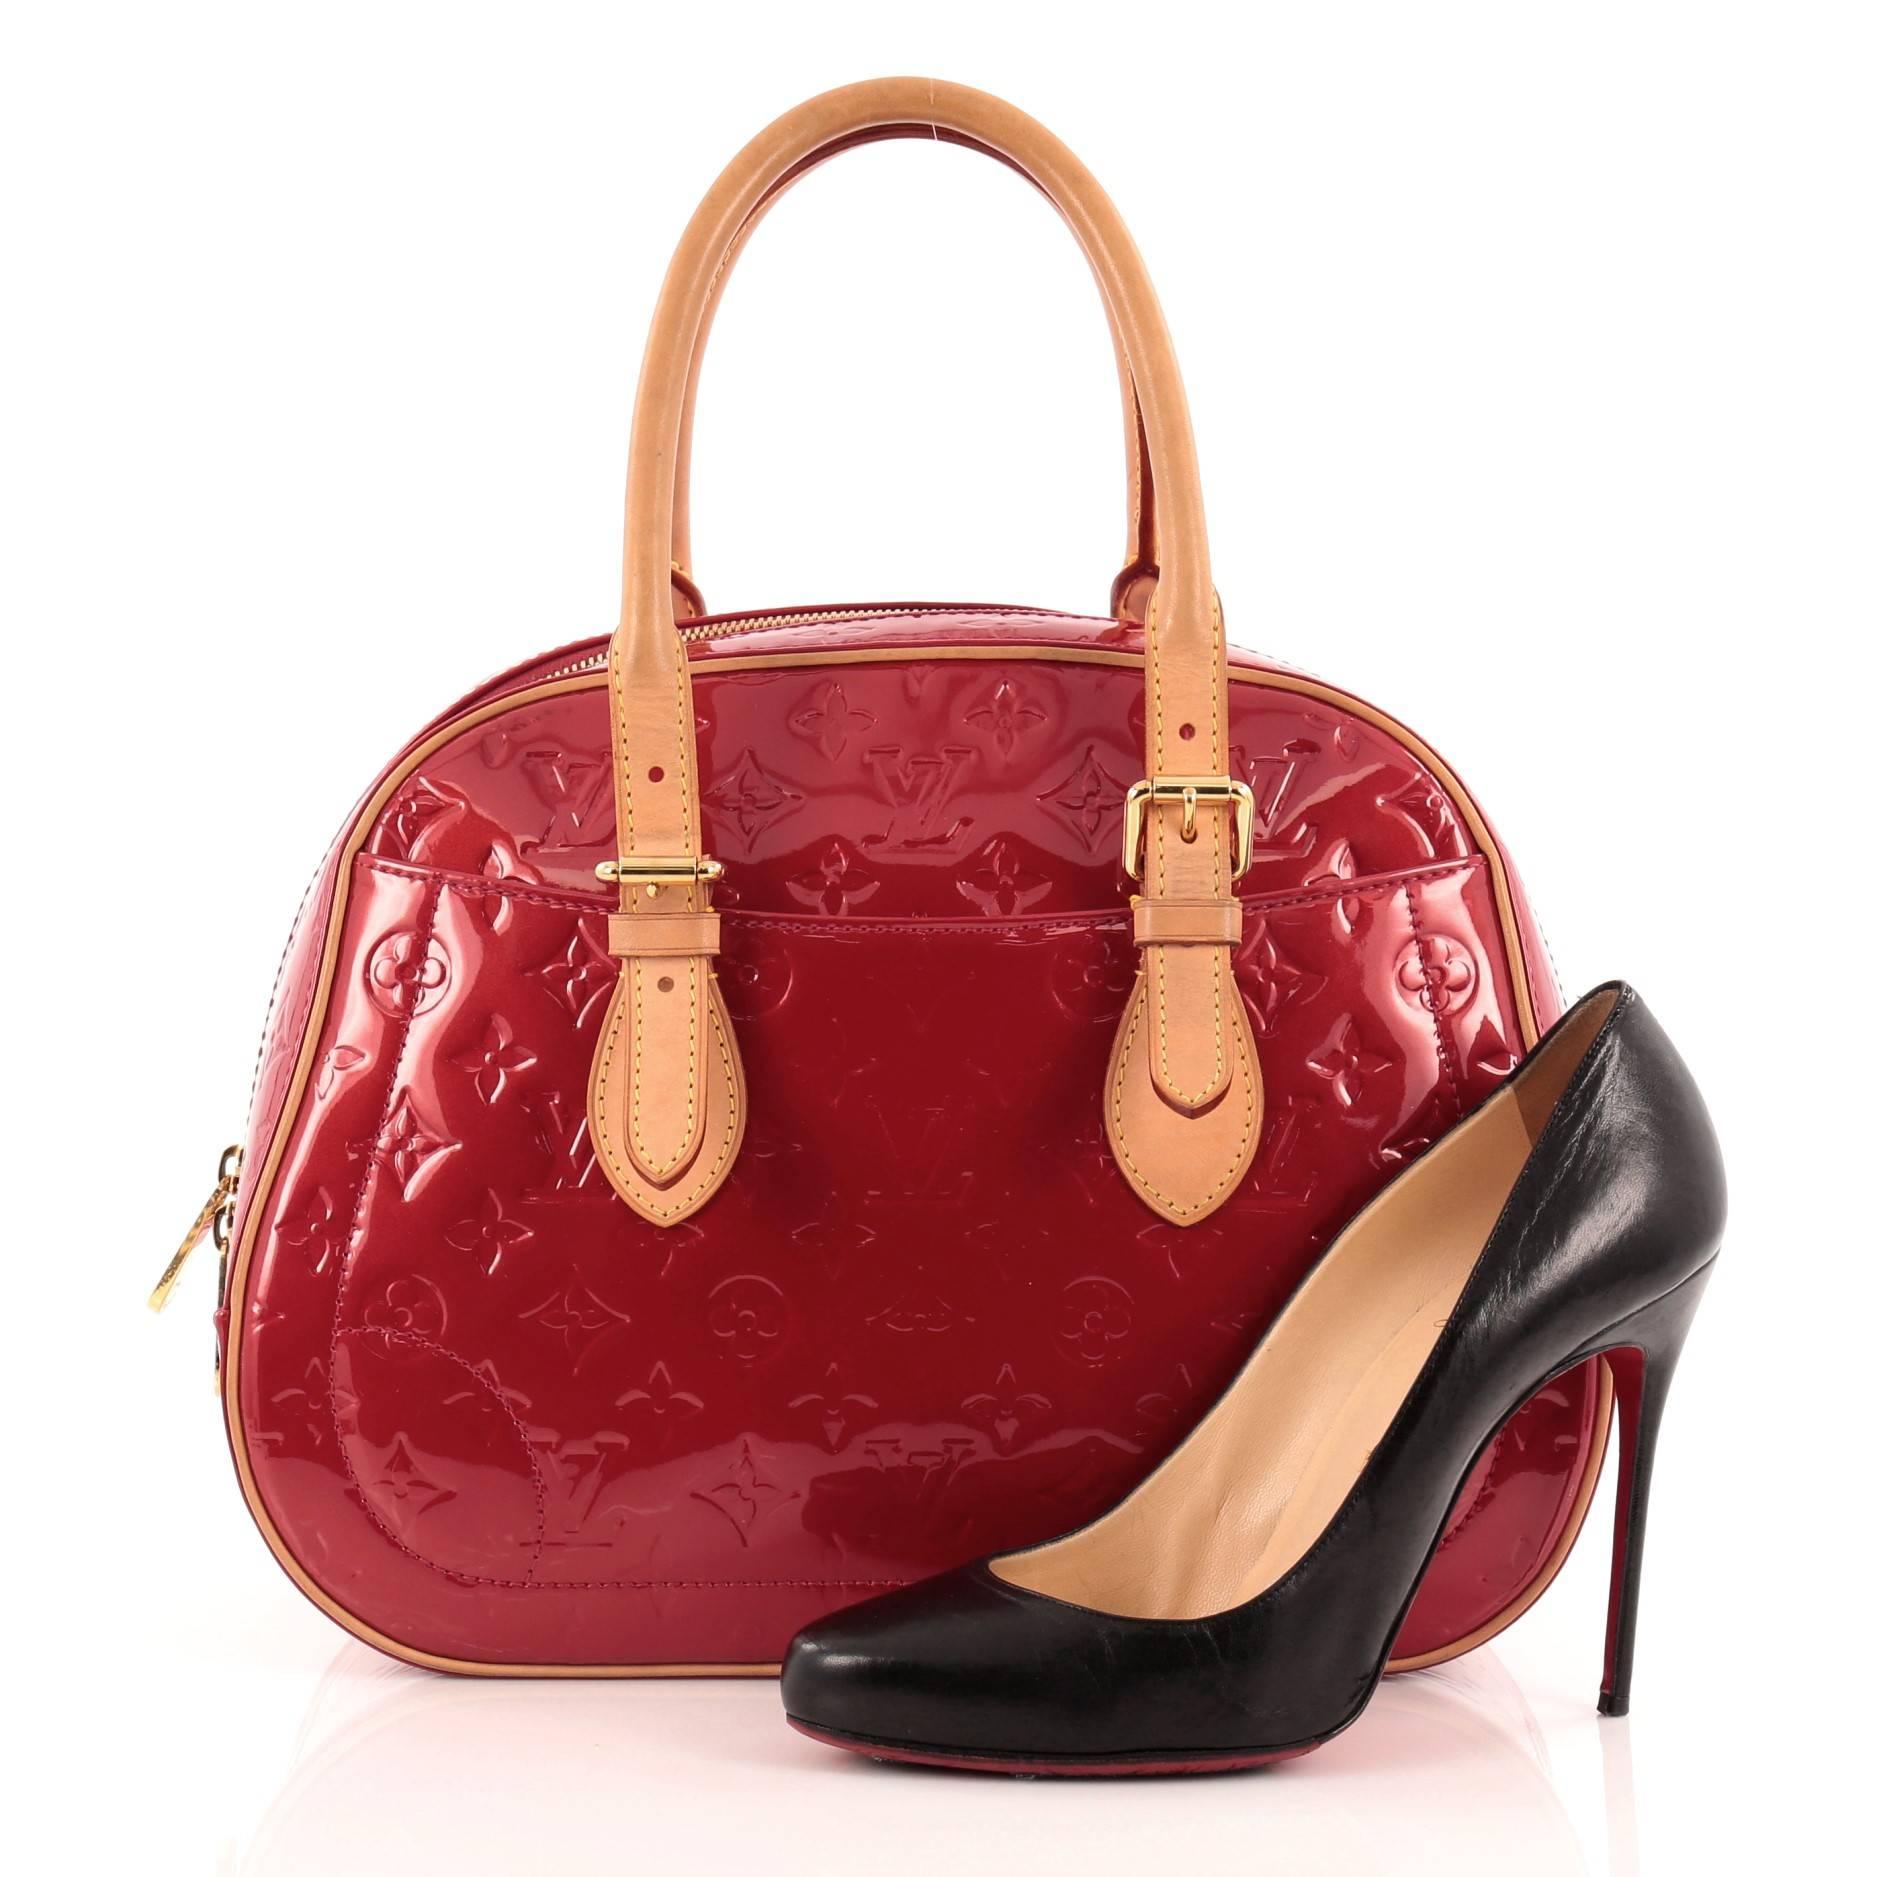 This authentic Louis Vuitton Summit Drive Monogram Vernis is perfect for on the go moments. Crafted in pomme d'amour red monogram vernis, this structured satchel features dual-rolled vachetta leather belted handles and trims, exterior pockets and